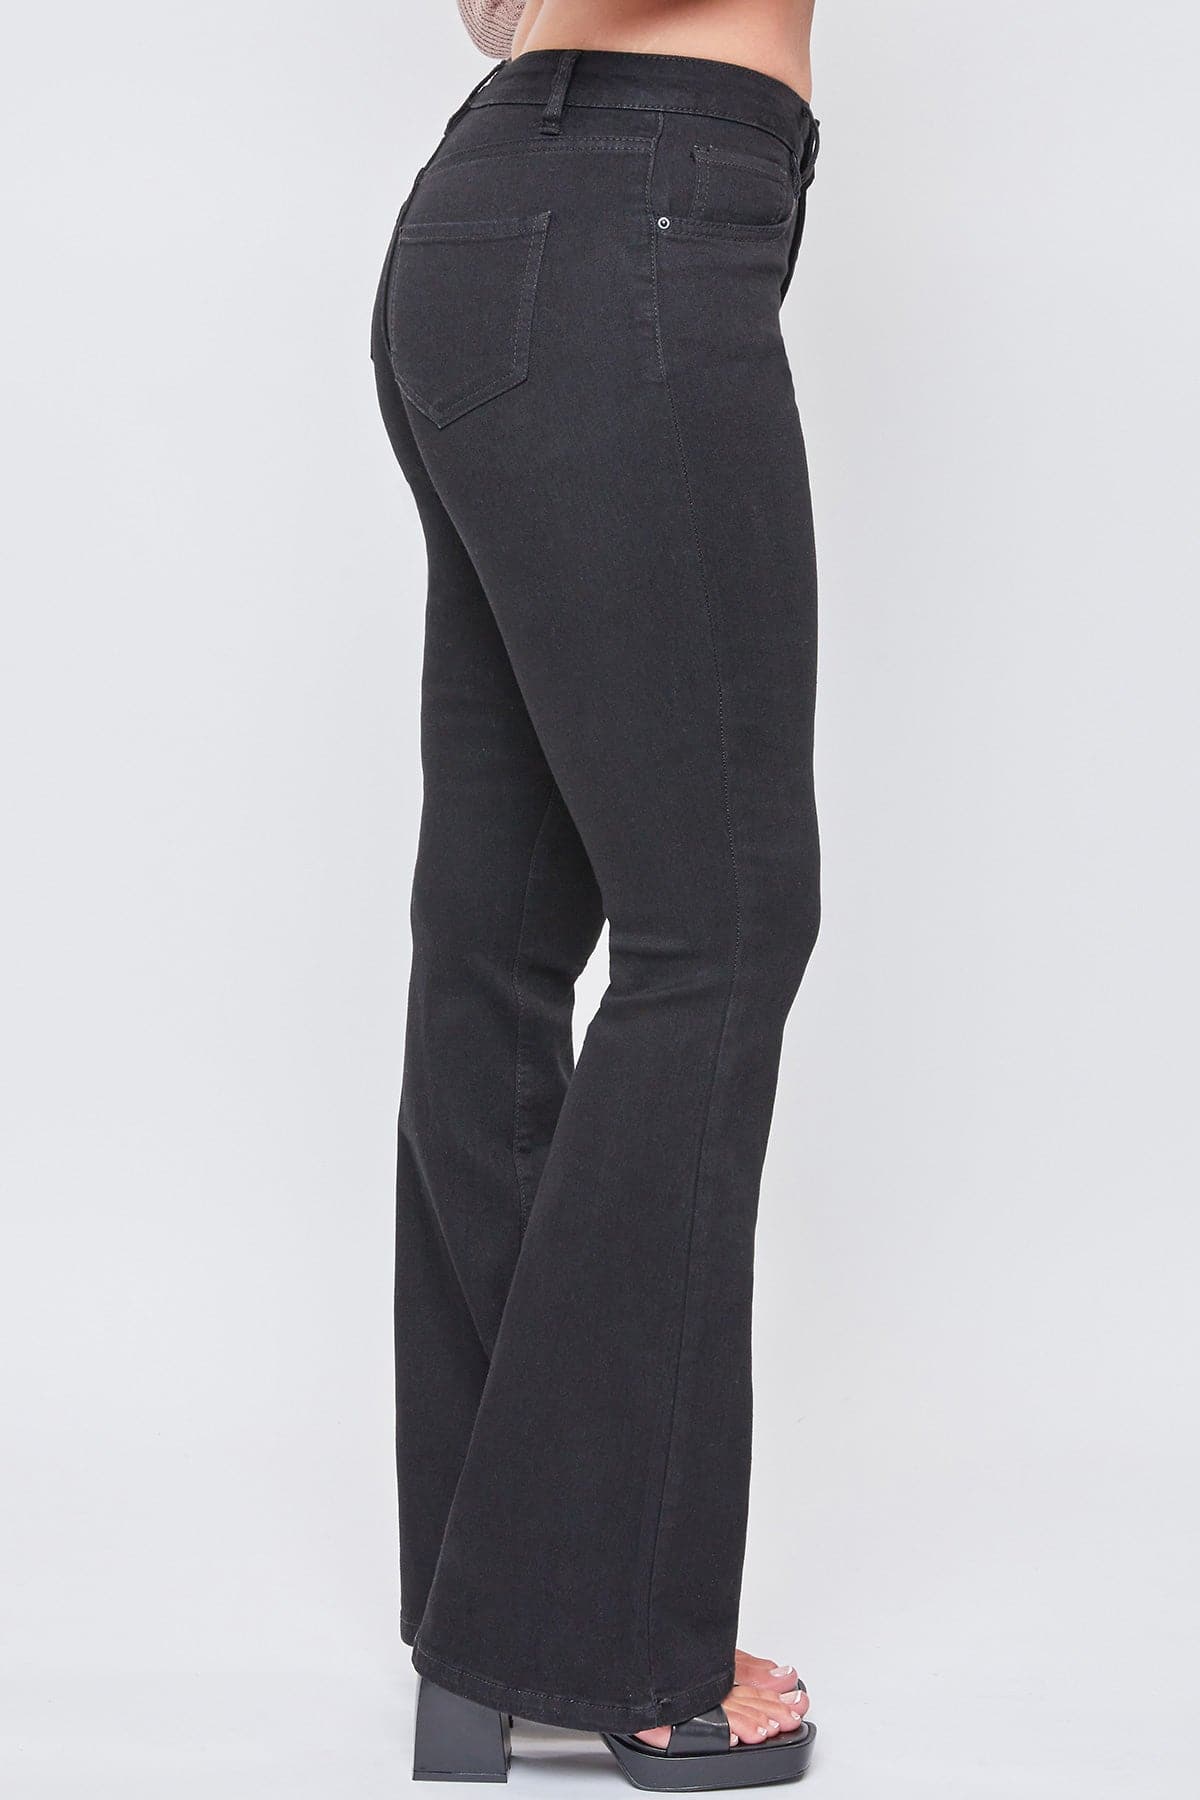 Women's Essential  Flare Jeans - Long Inseam